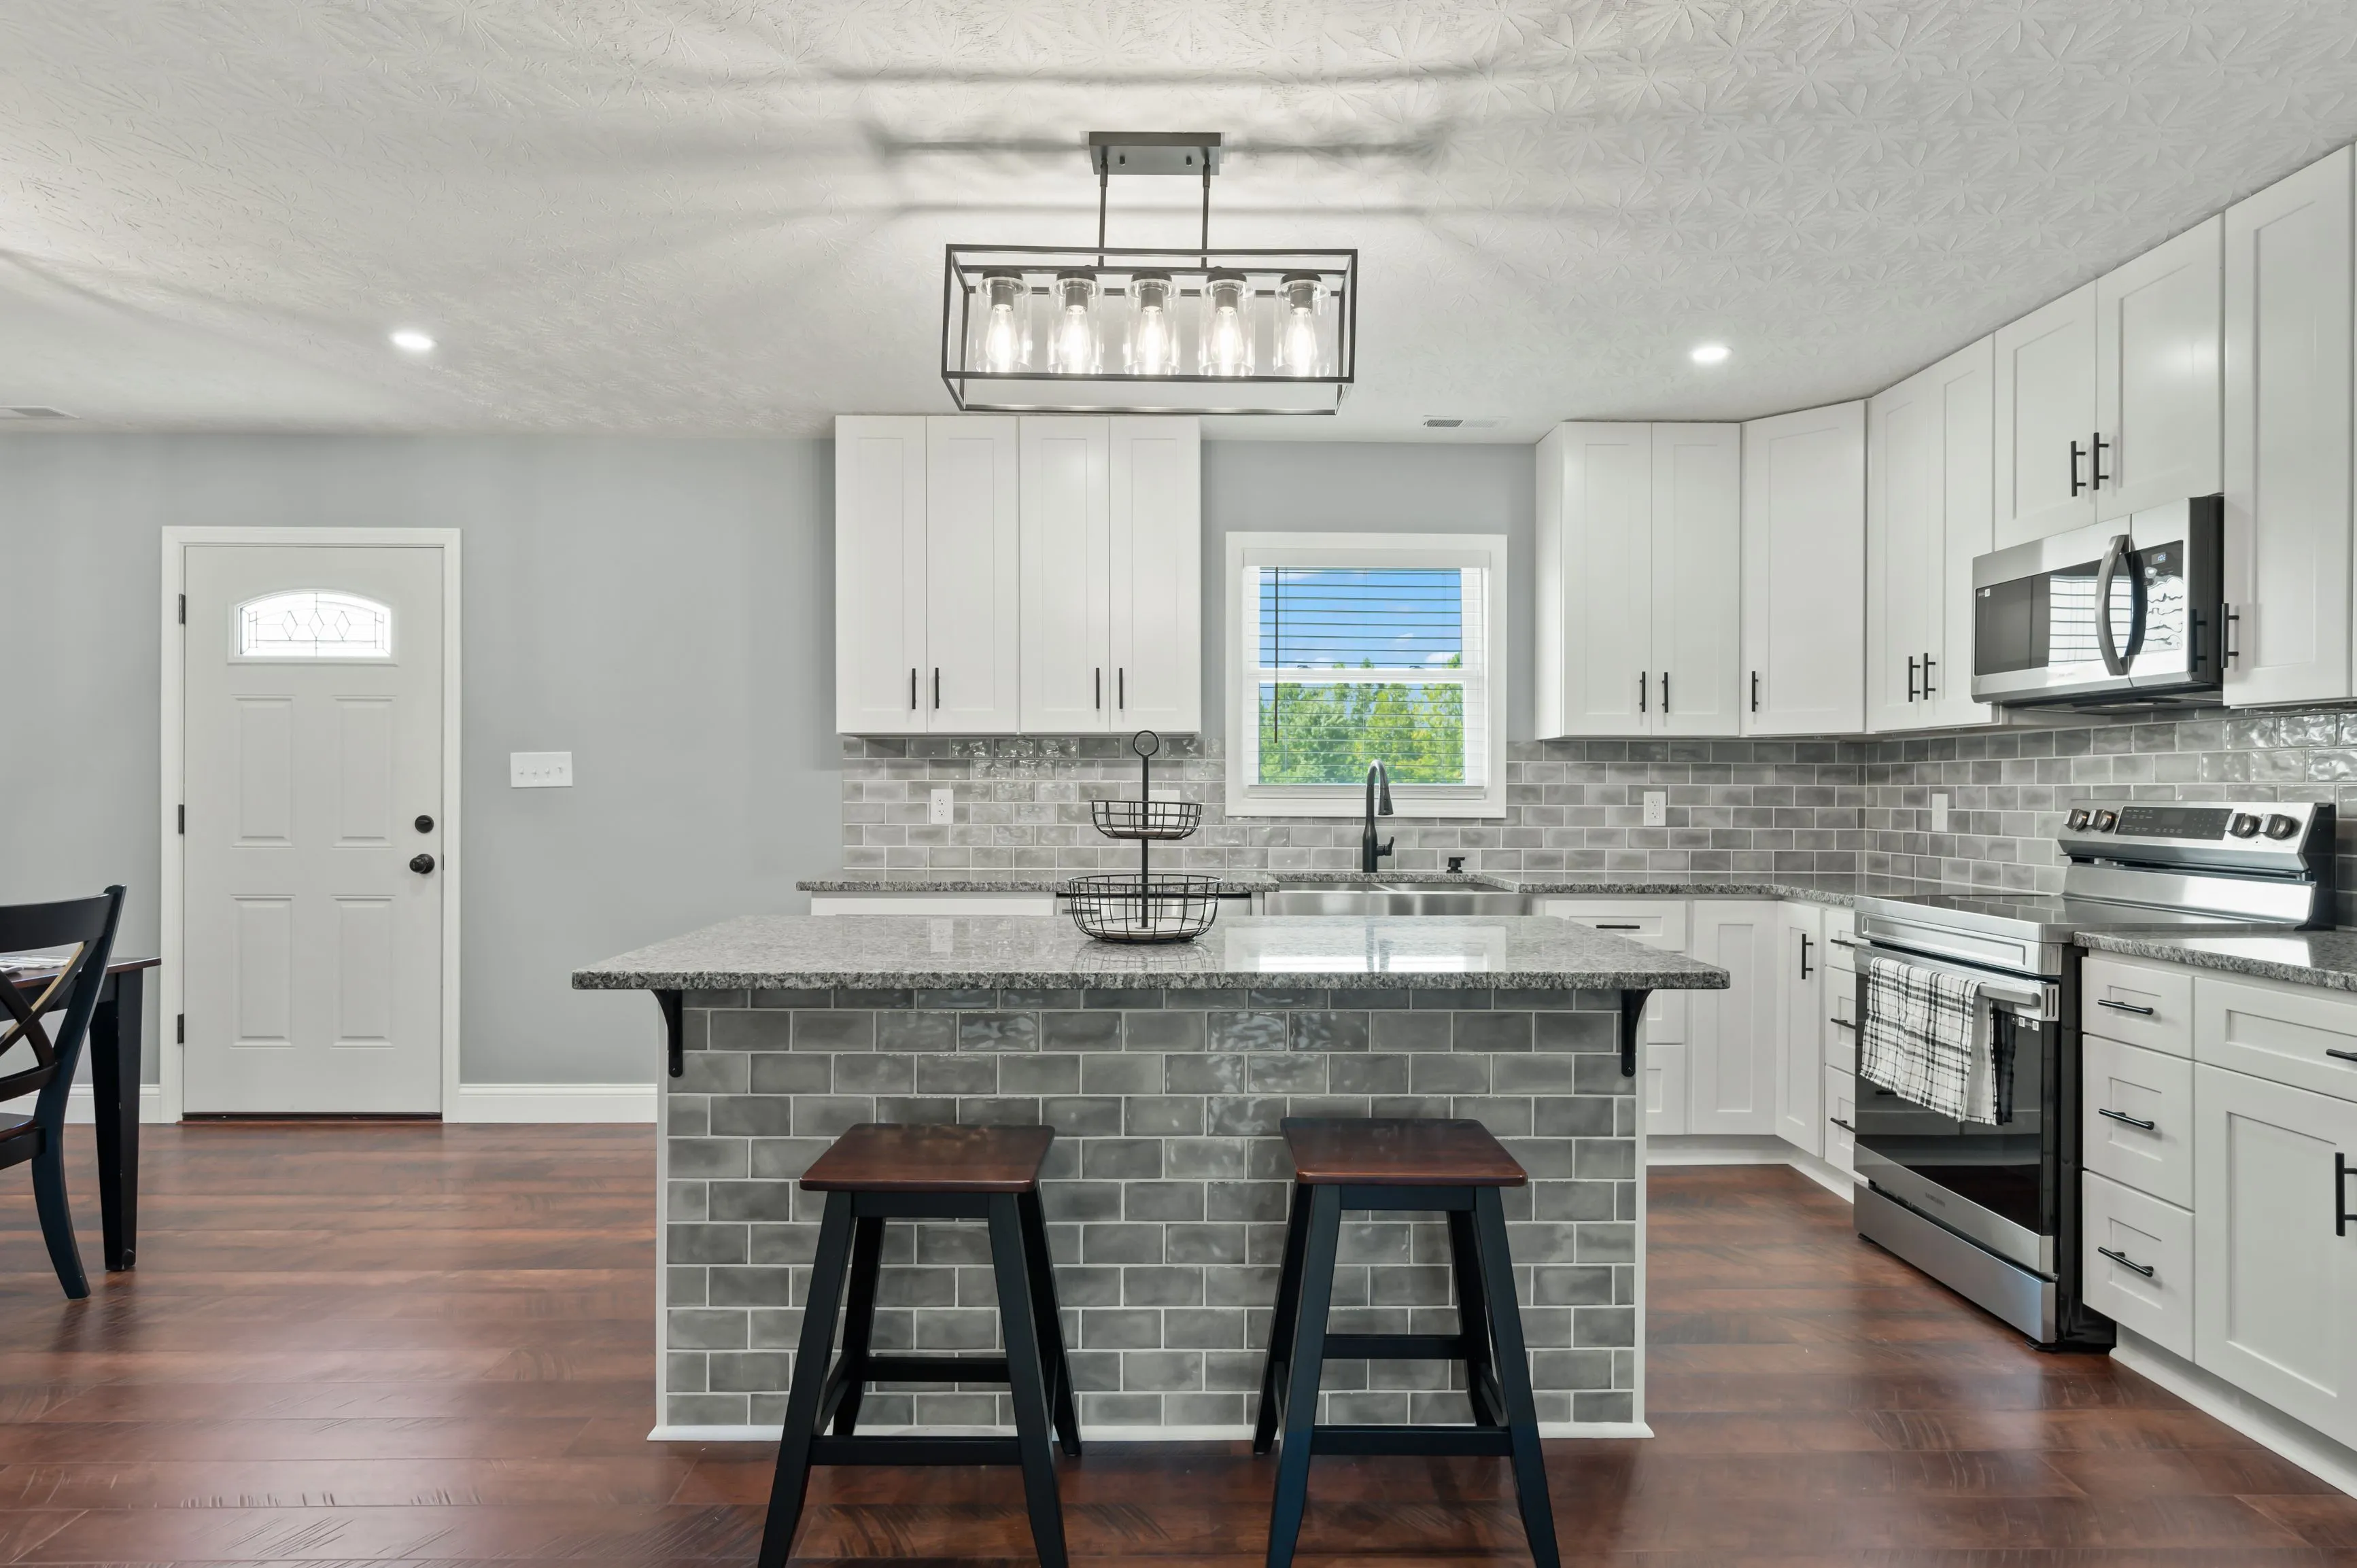 Modern kitchen interior with white cabinetry, stainless steel appliances, subway tile backsplash, granite countertops, and a kitchen island with two stools.